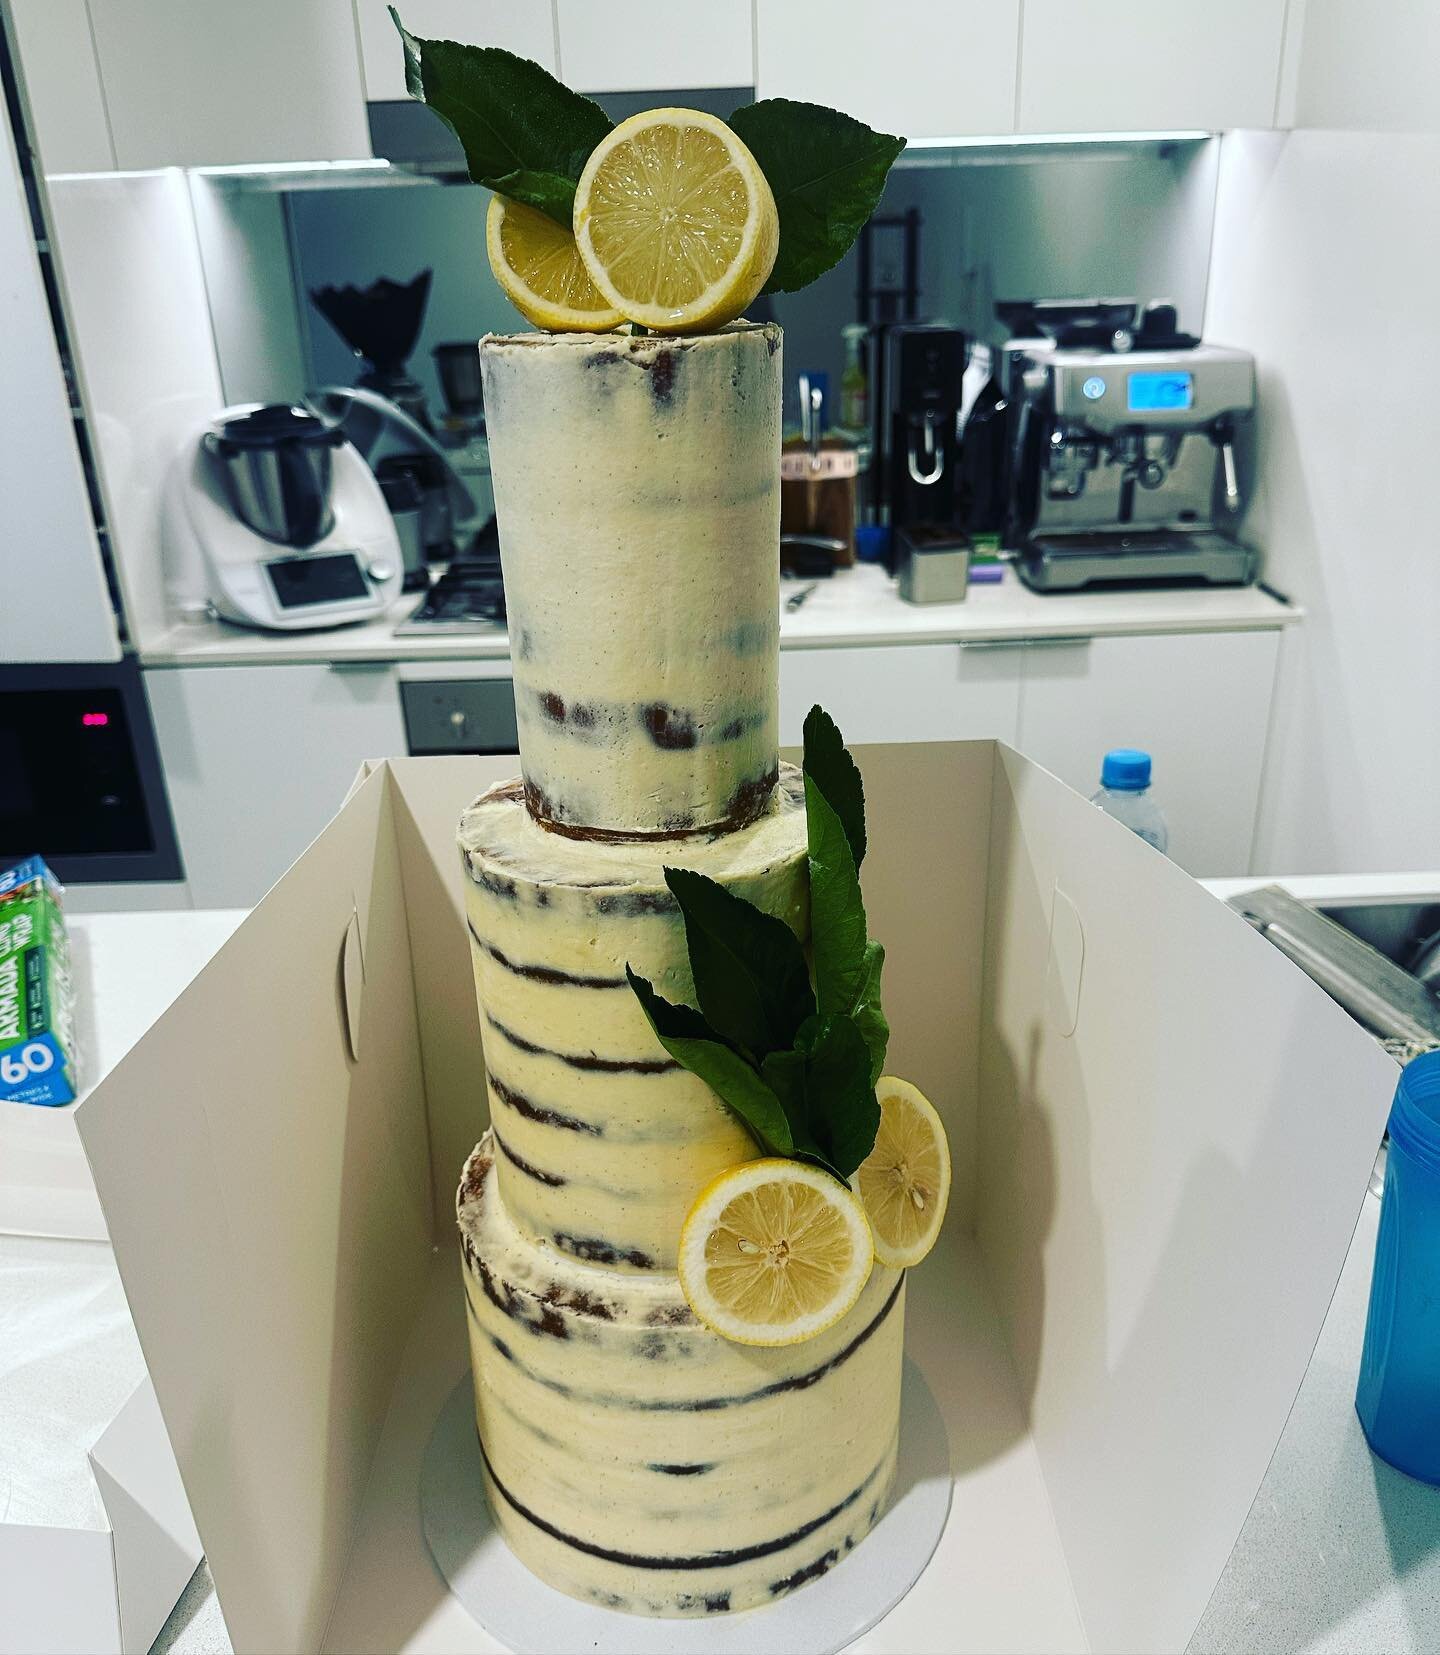 Congrats to the amazing couple on their wedding day! Feat a 3 tier white choc mud filled with Nana Helen&rsquo;s 8hr lemon curd, fresh lemons supplied by the client #therippedbaker #weddingcake #newsteadcakes #brisbanecakes #brisbanecakebar #brisbane